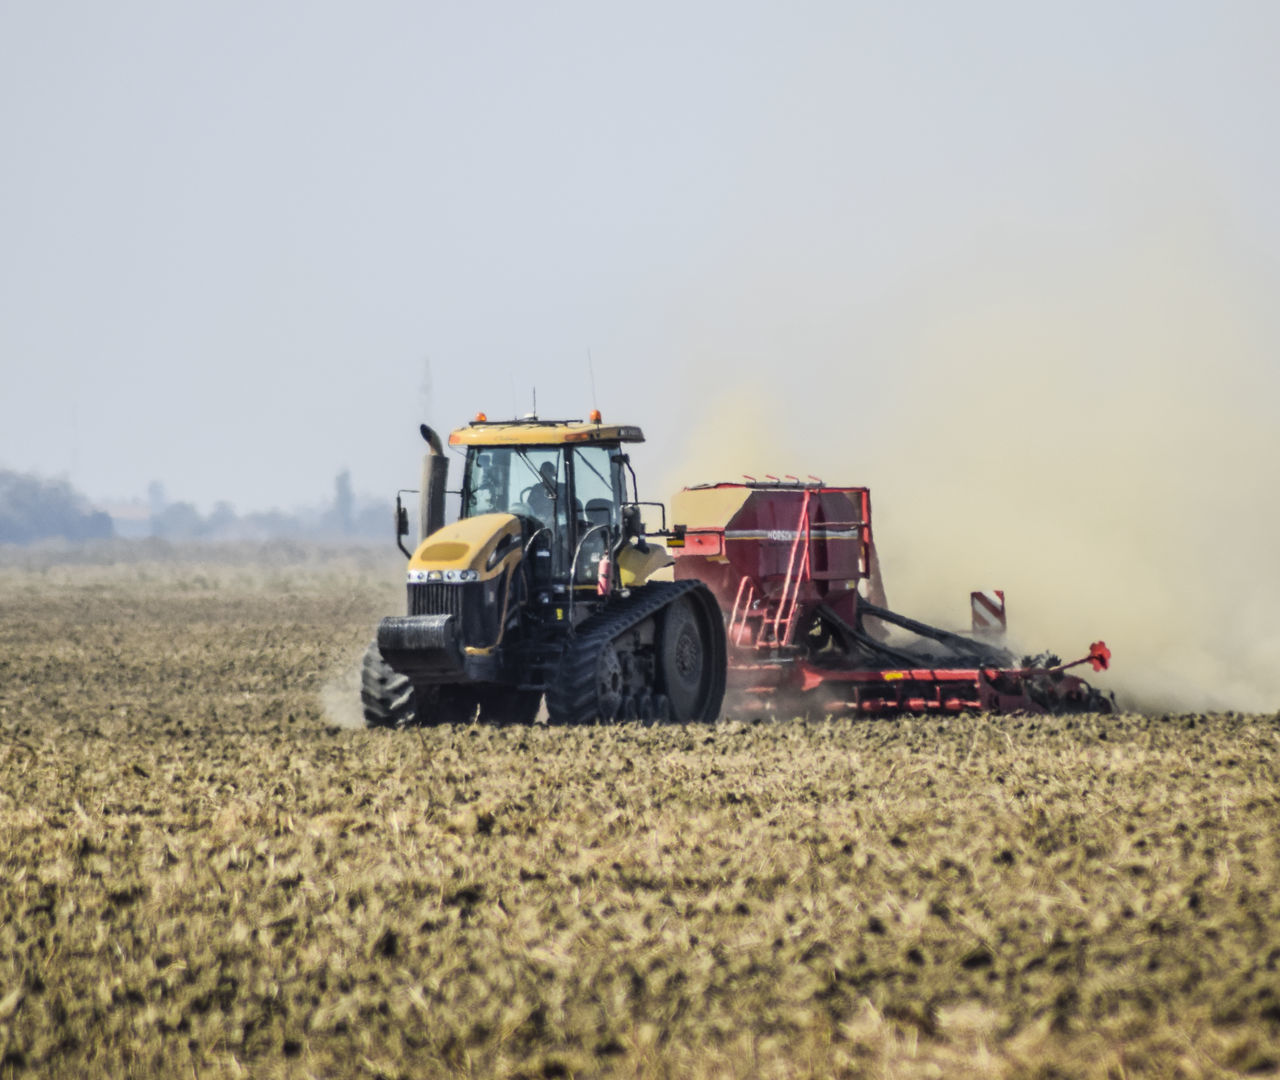 Dust, field, ploughing, sky, agriculture, countryside, cultivator, equipment, making, fertilizer, top dressing, plowed field, tractor, track, shoes, clubs, reagent, chemical, nitrate, phosphate, farm, farming, grain, harvest, industry, machinery, work, ag